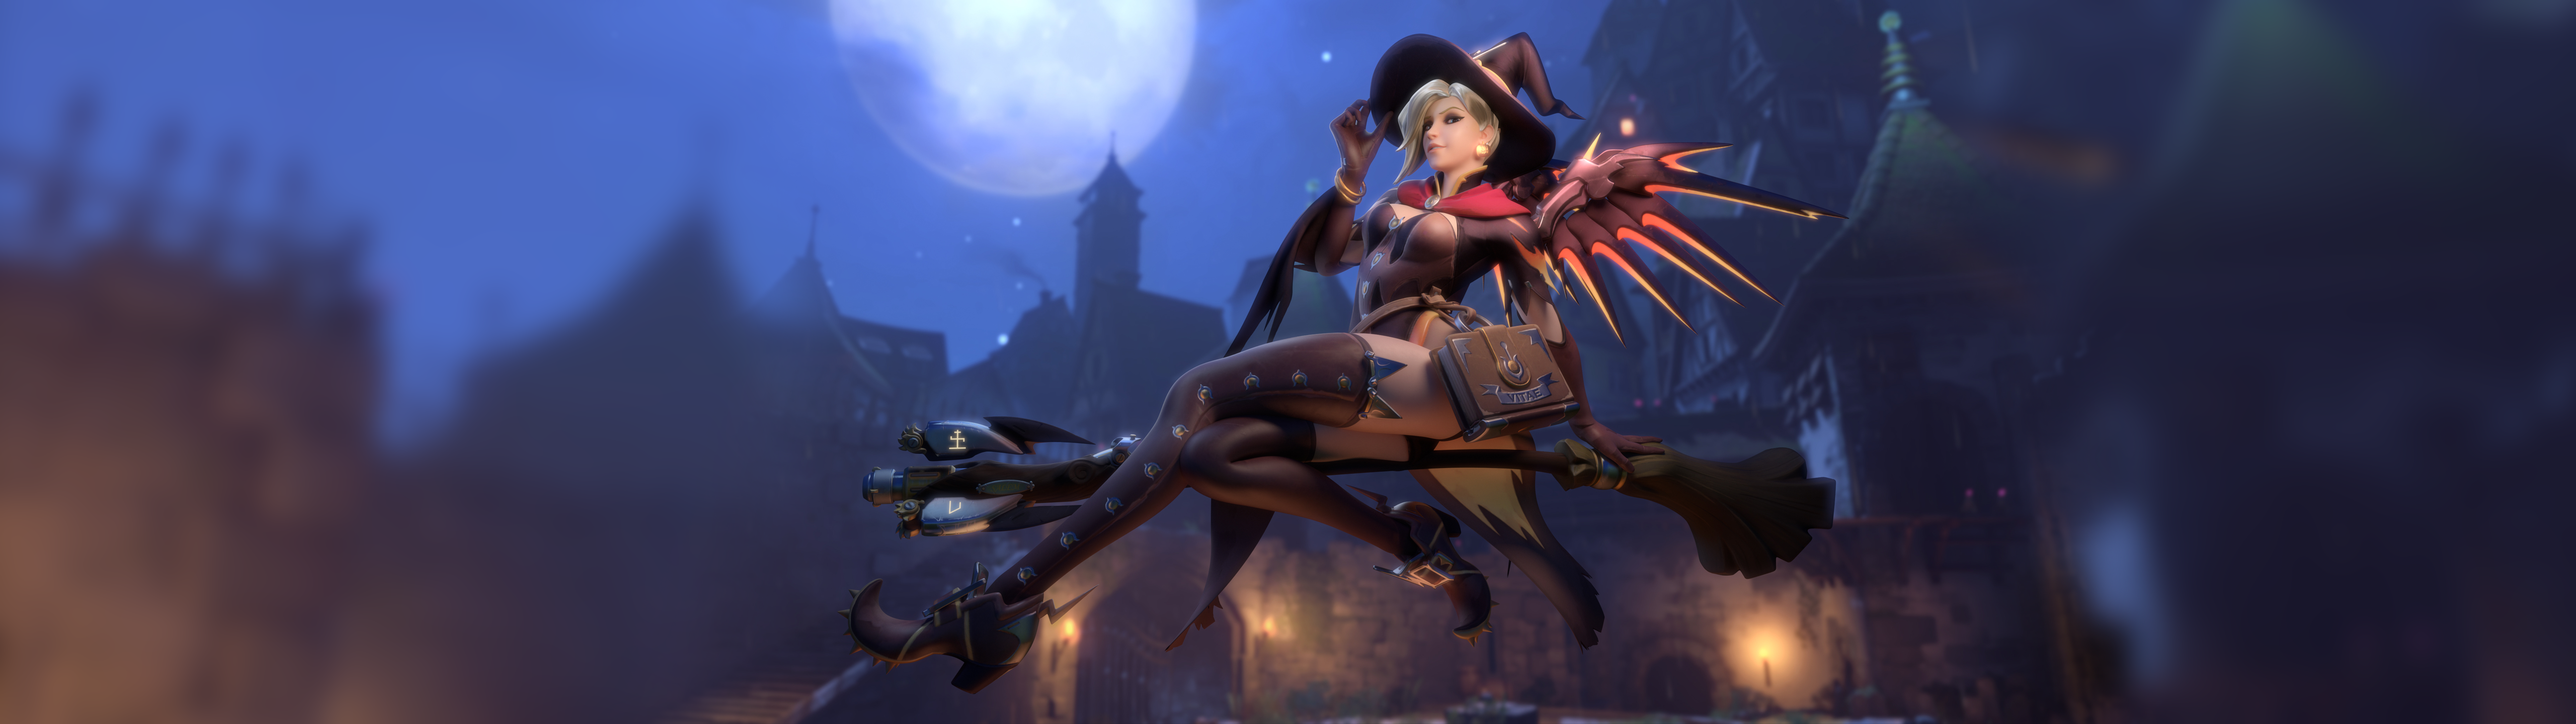 Overwatch Dual Monitor Png - Overwatch Mercy Witch Skin Wing - HD Wallpaper 